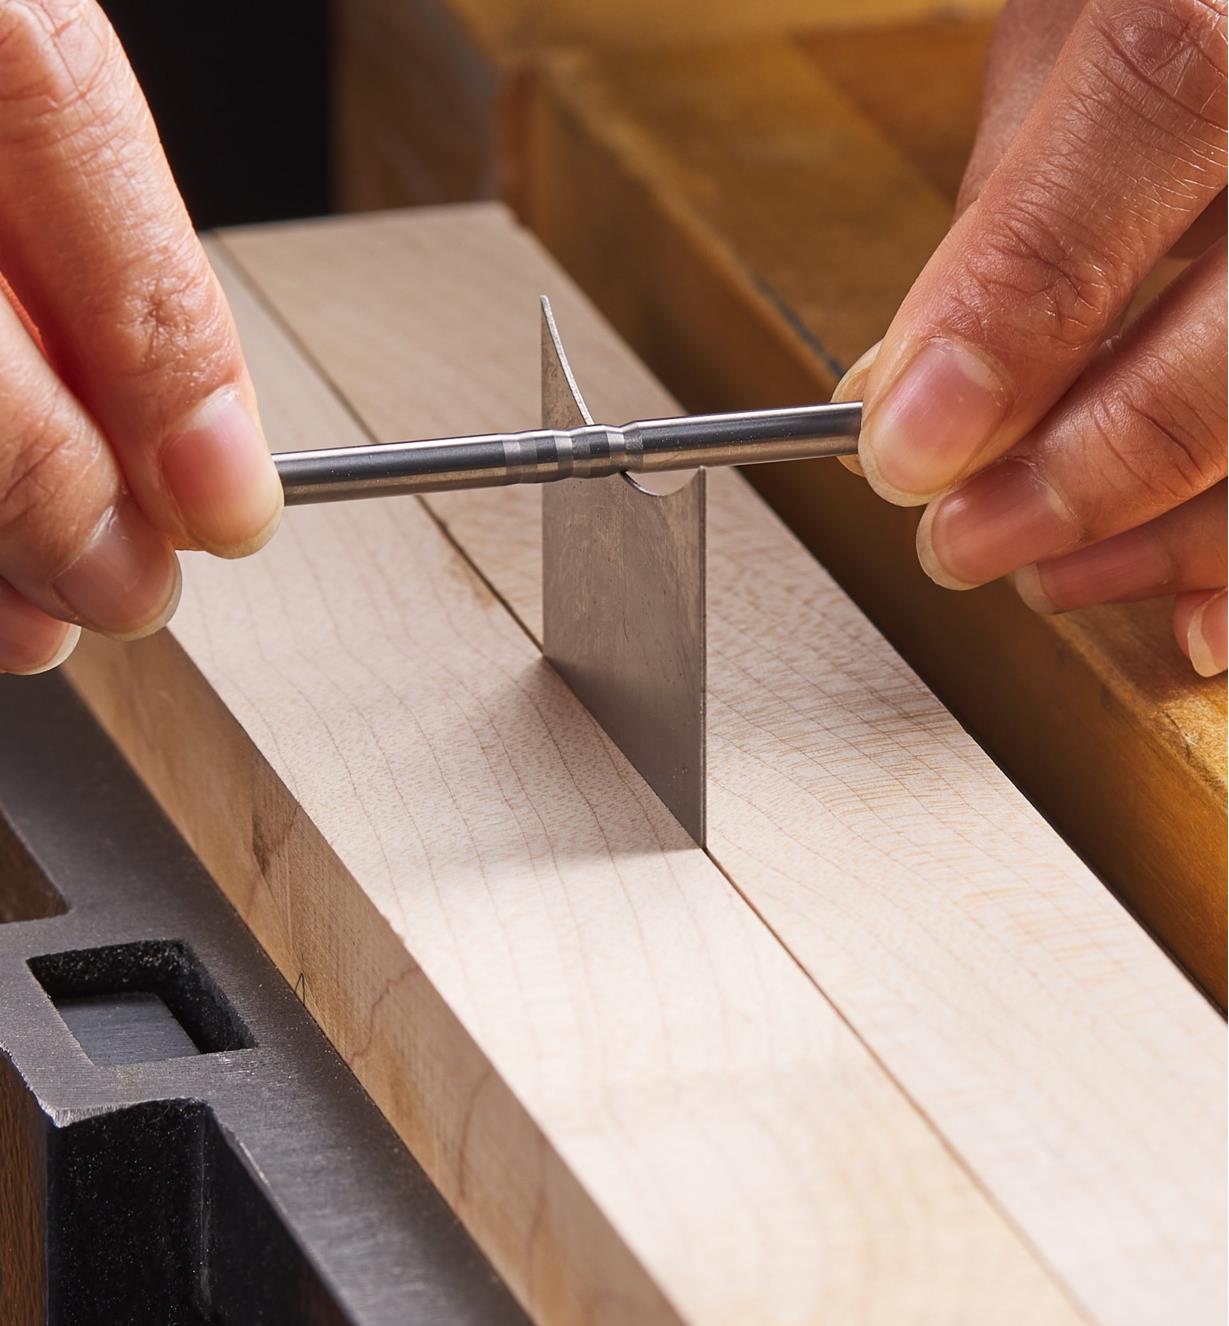 Using a burnishing rod to burnish 15° hooks on the concave edge of a scraper clamped in a vise